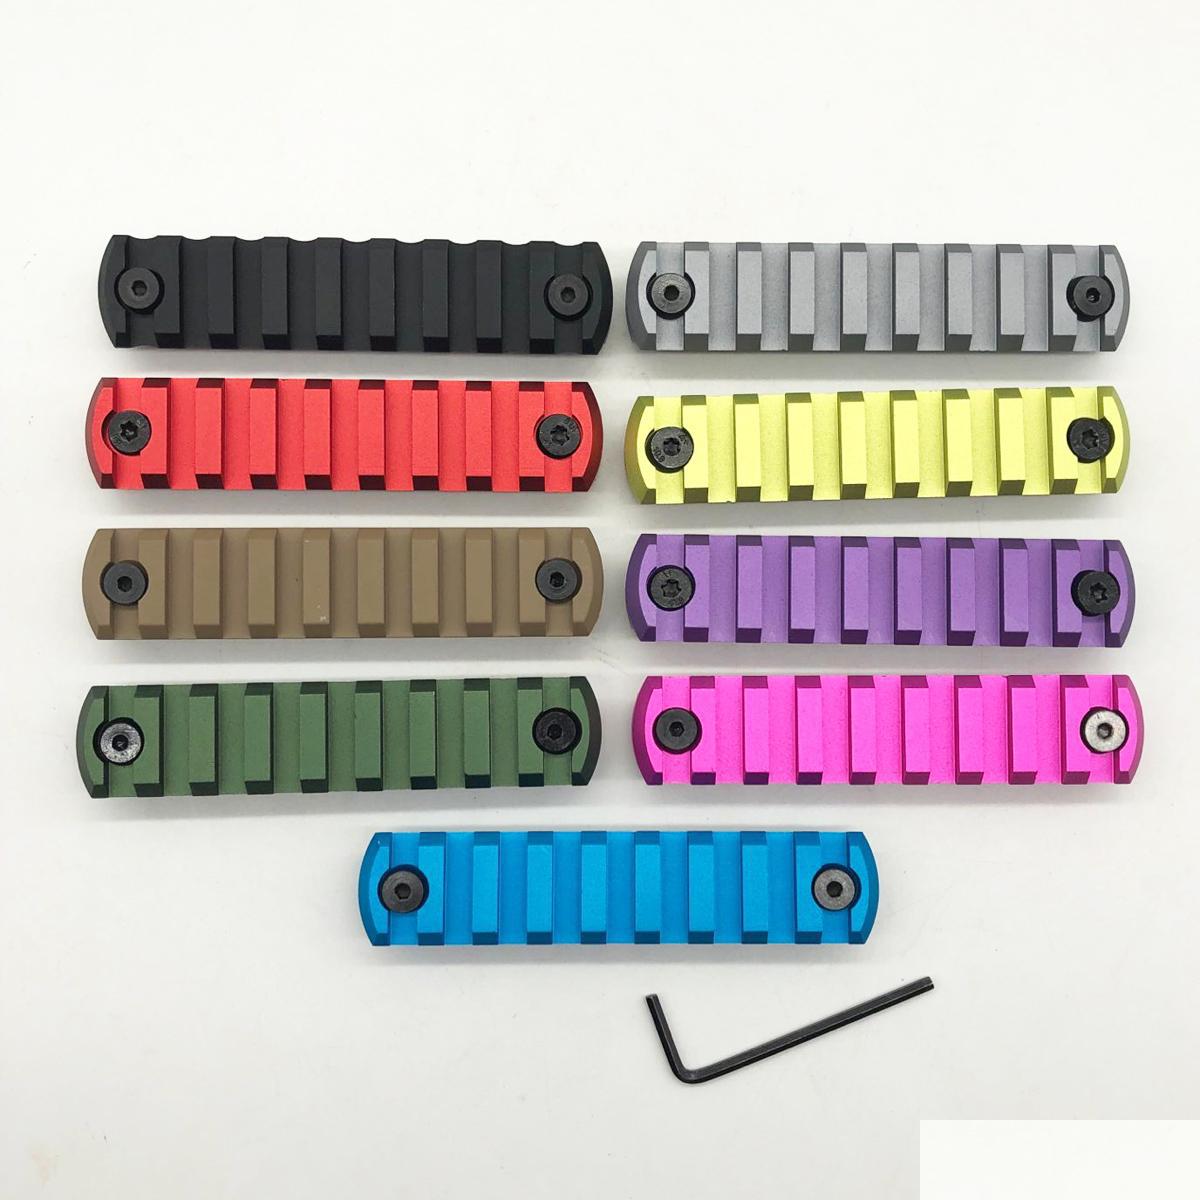 

Others Tactical Accessories Black/Red/Tan/Blue/Pink/Grey/Purple/Grass Green/Olive Green 9 Colors9 Slots Keymod Rail Section Picatinn Dhufy, Color choice